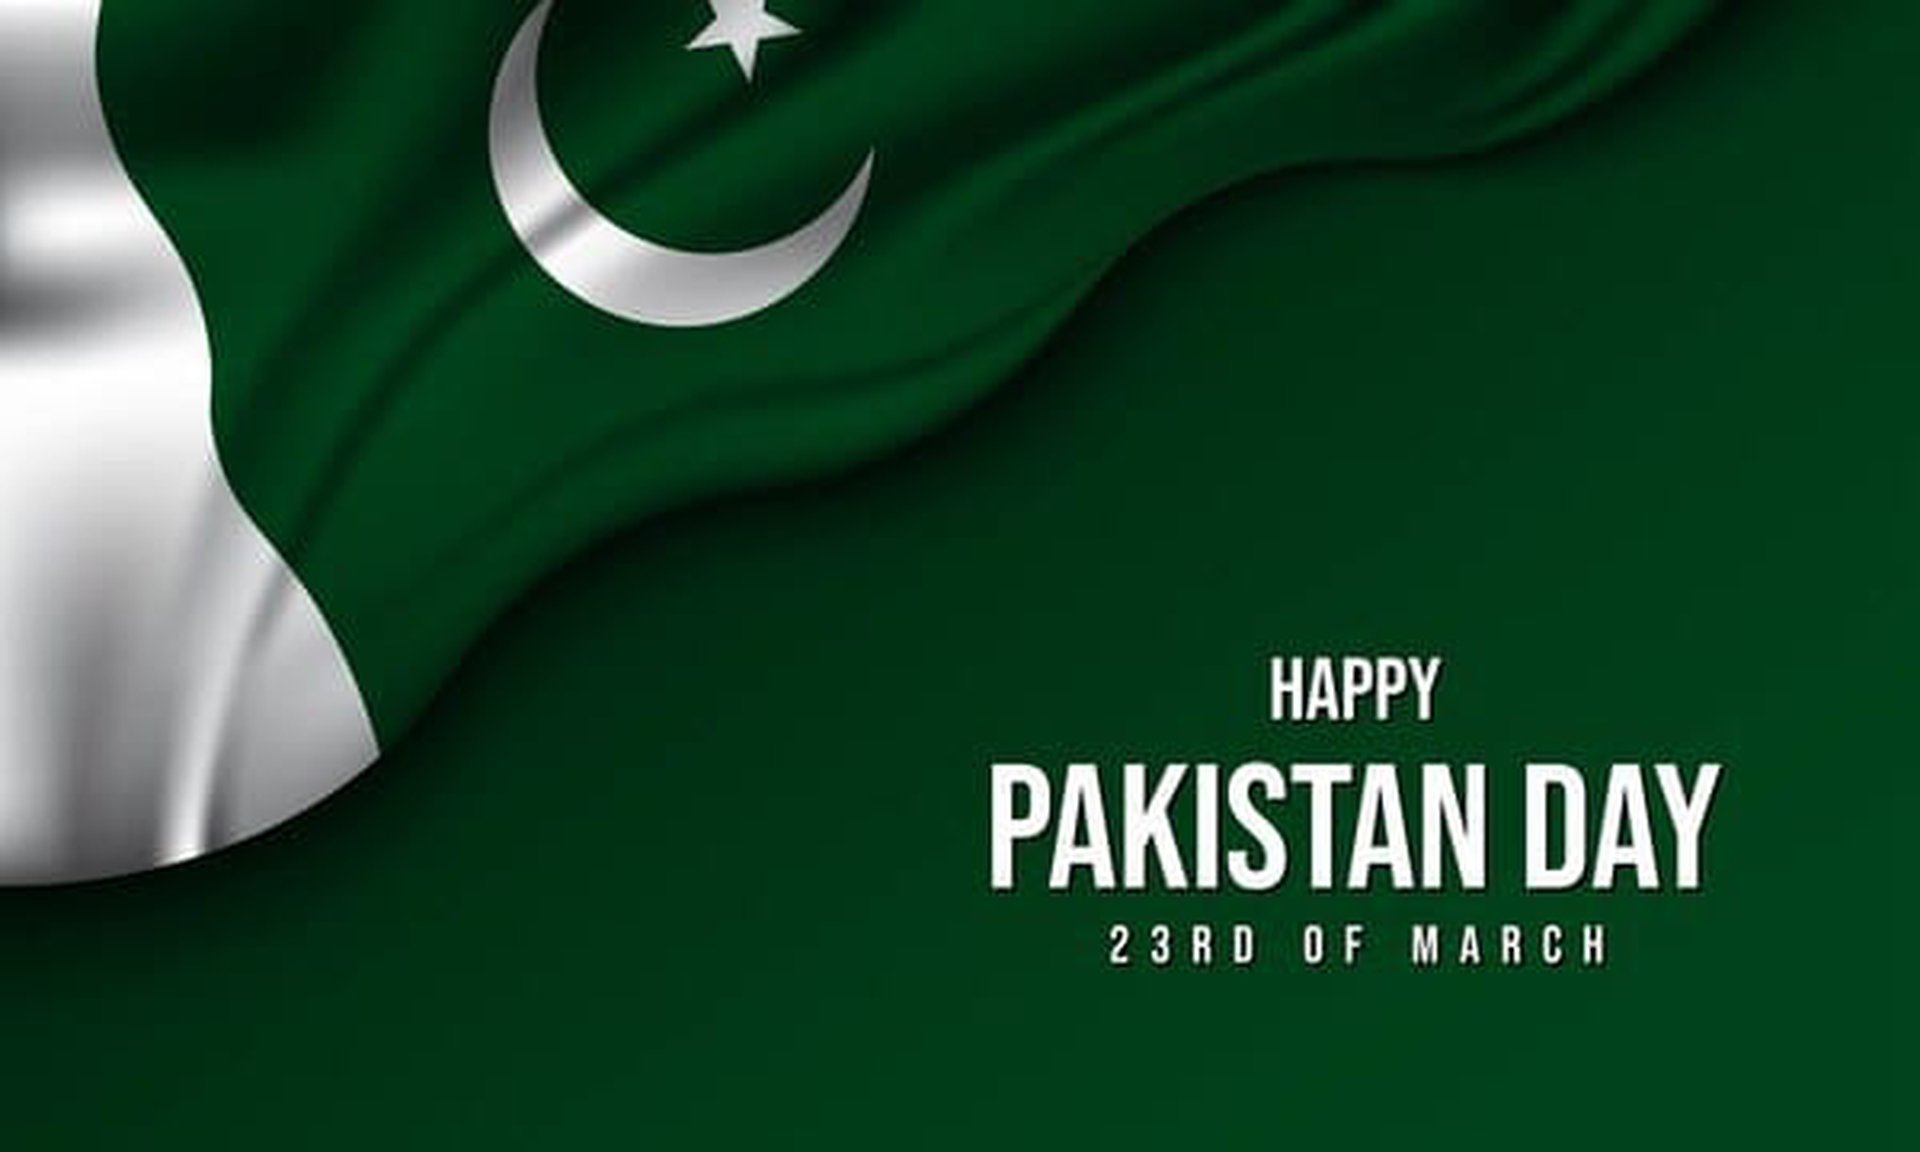 Dear students from Pakistan, we congratulate you with a national holiday – Pakistan Day